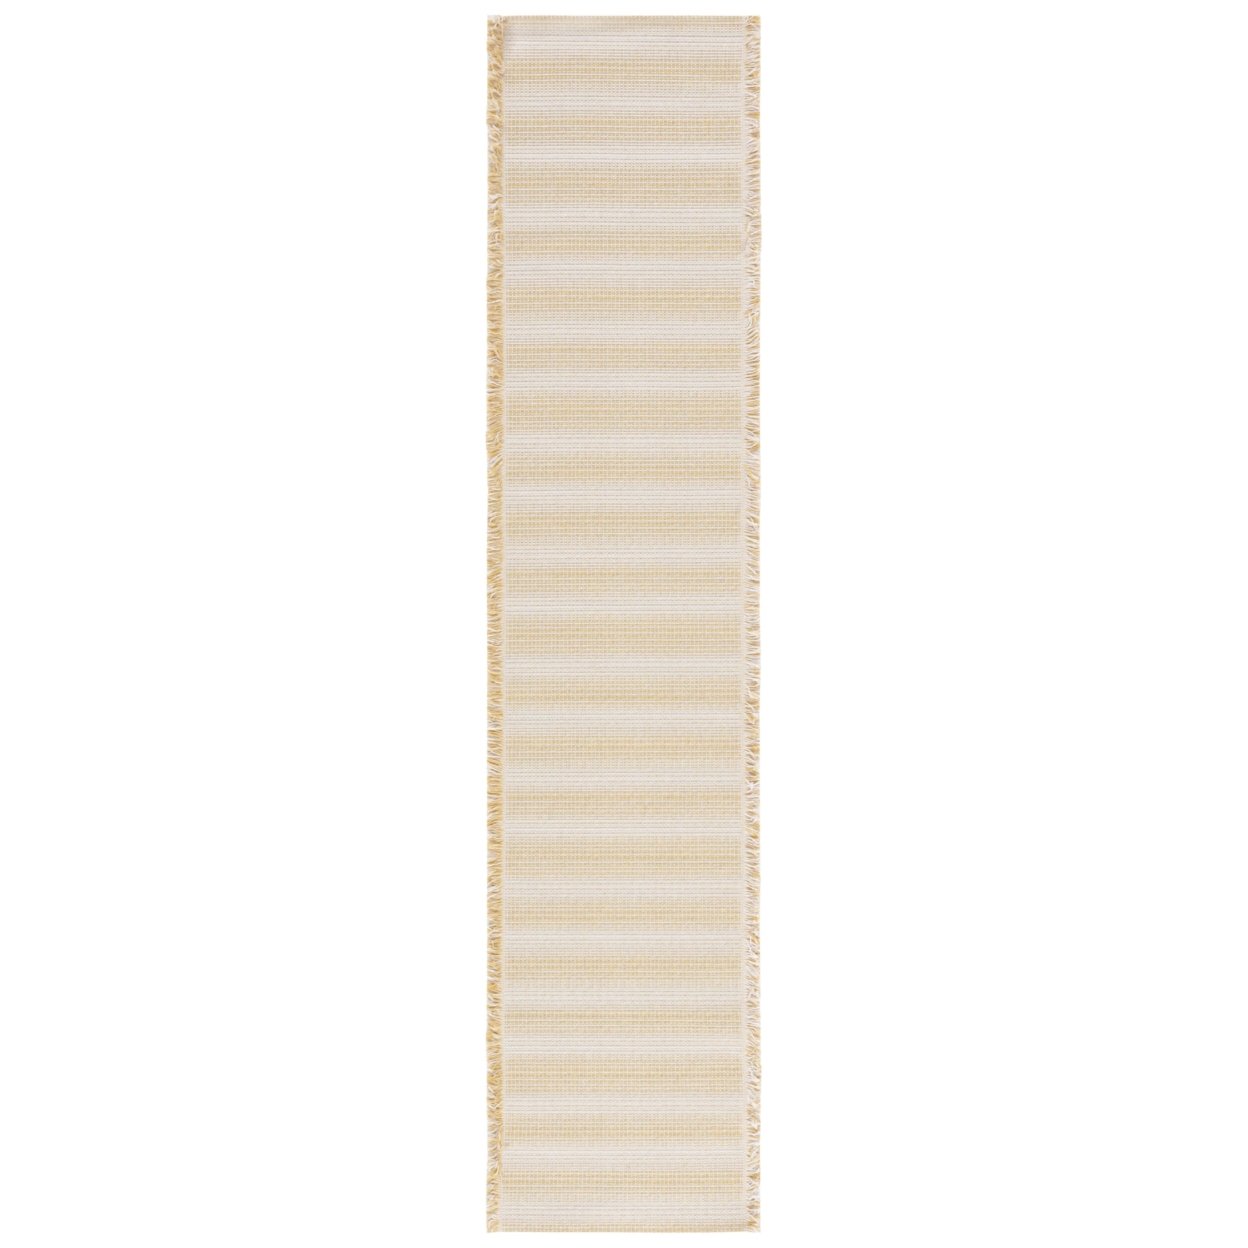 Safavieh AGT501C Augustine 500 Ivory / Yellow - Charcoal / Ivory, 2' X 9' Runner